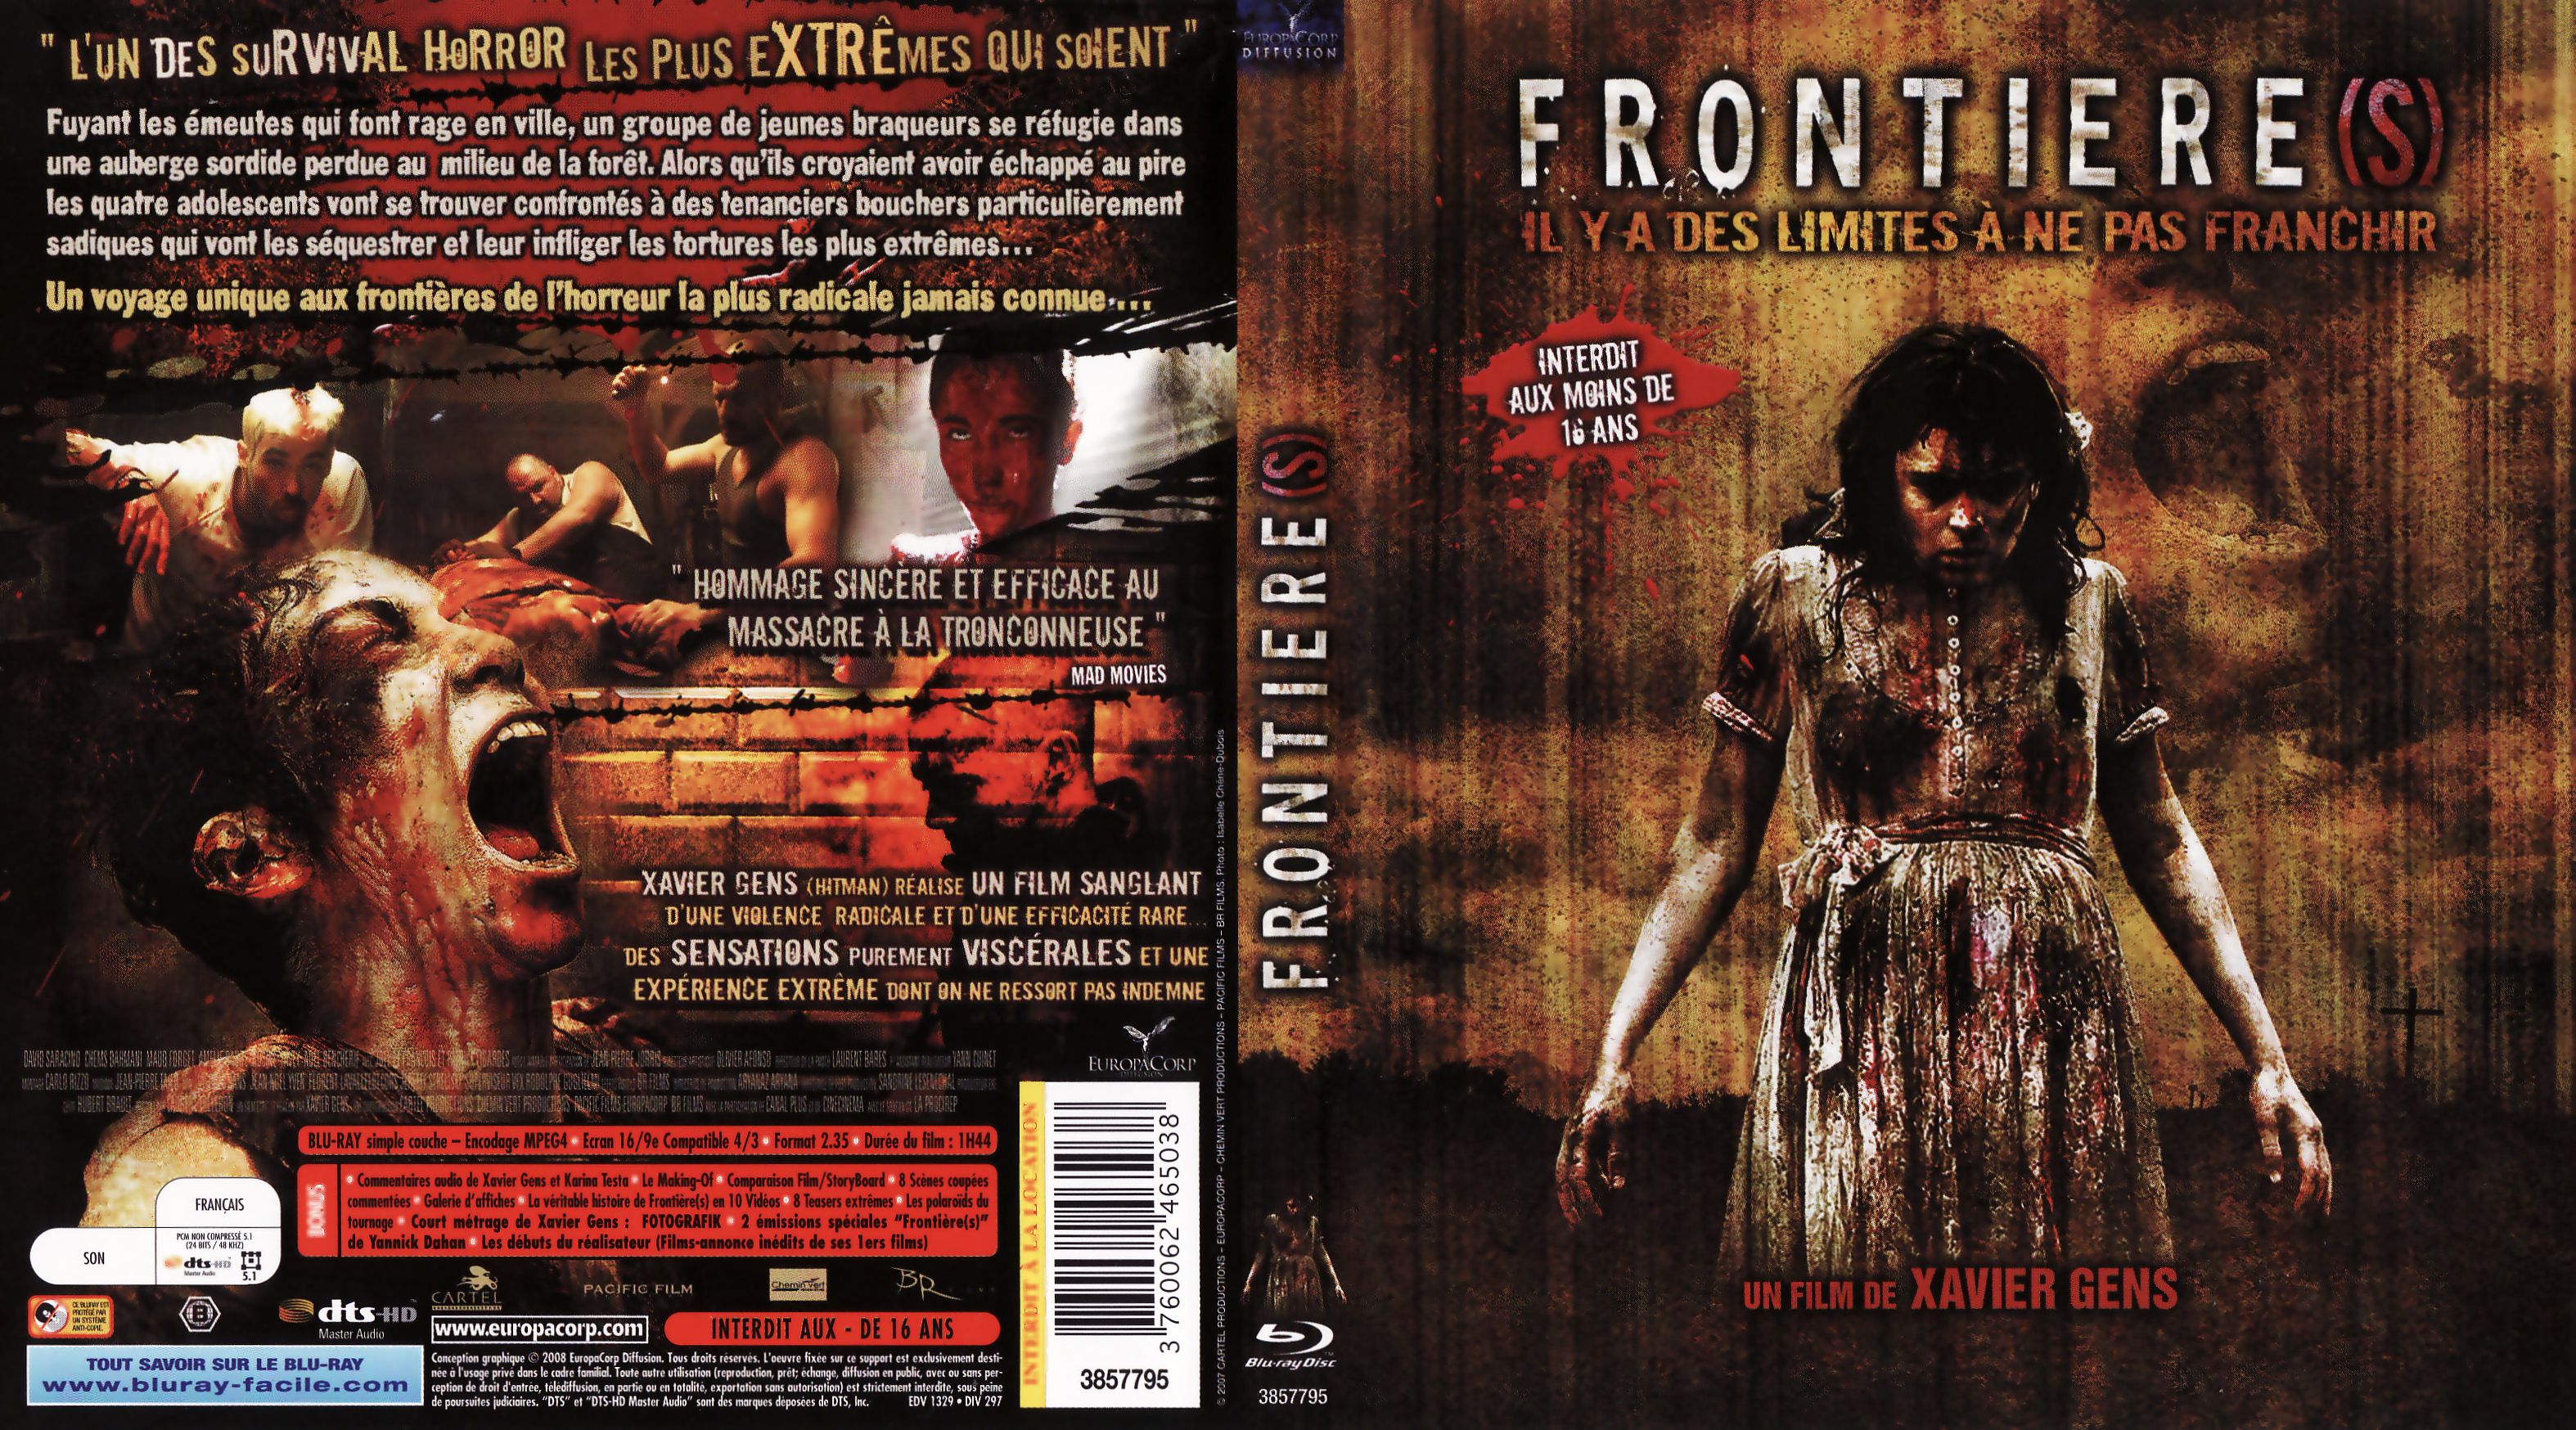 Jaquette DVD Frontieres (BLU-RAY)